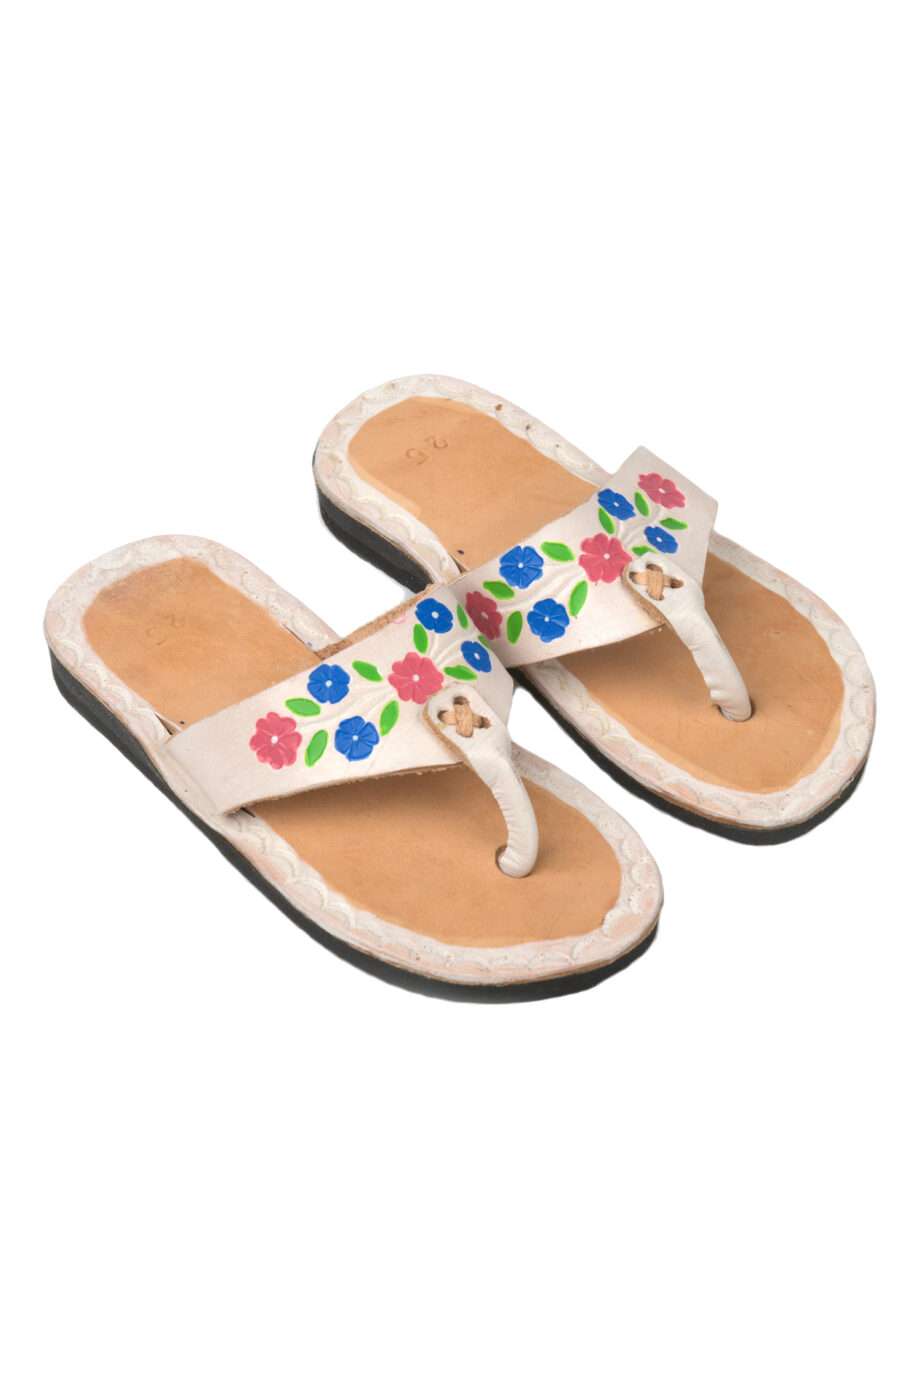 flor white leather flipflop small